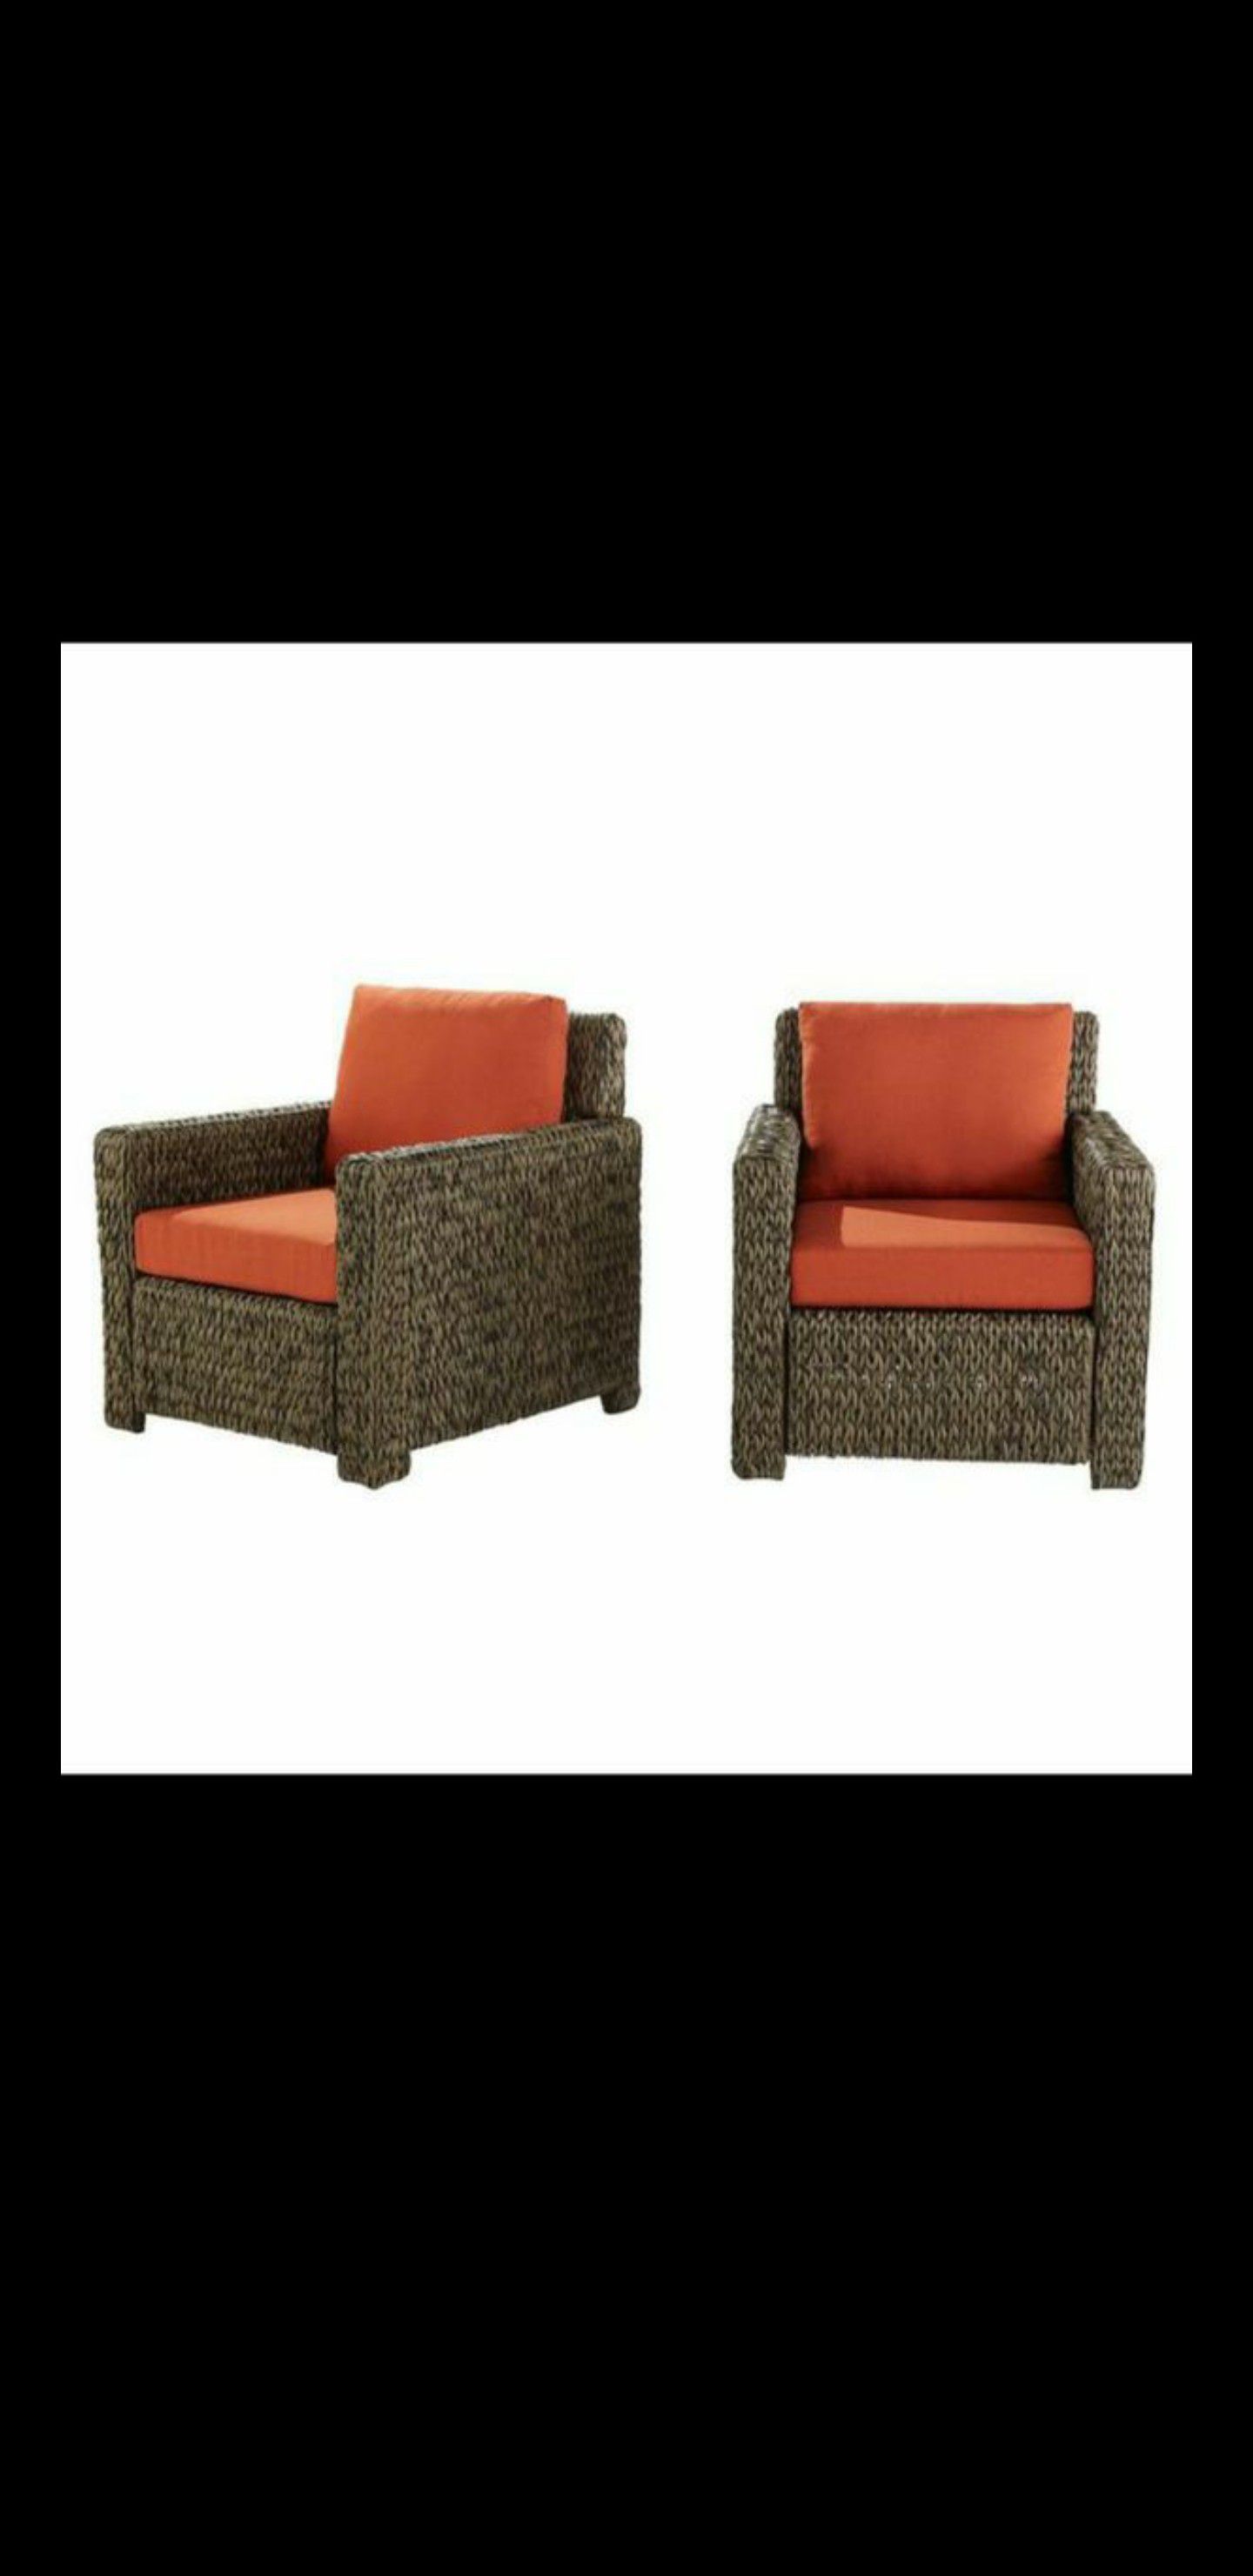 New Hampton Bay Laguna Point All-Weather Wicker Outdoor Lounge Chairs with Quarry Red Cushions (Pick up only)